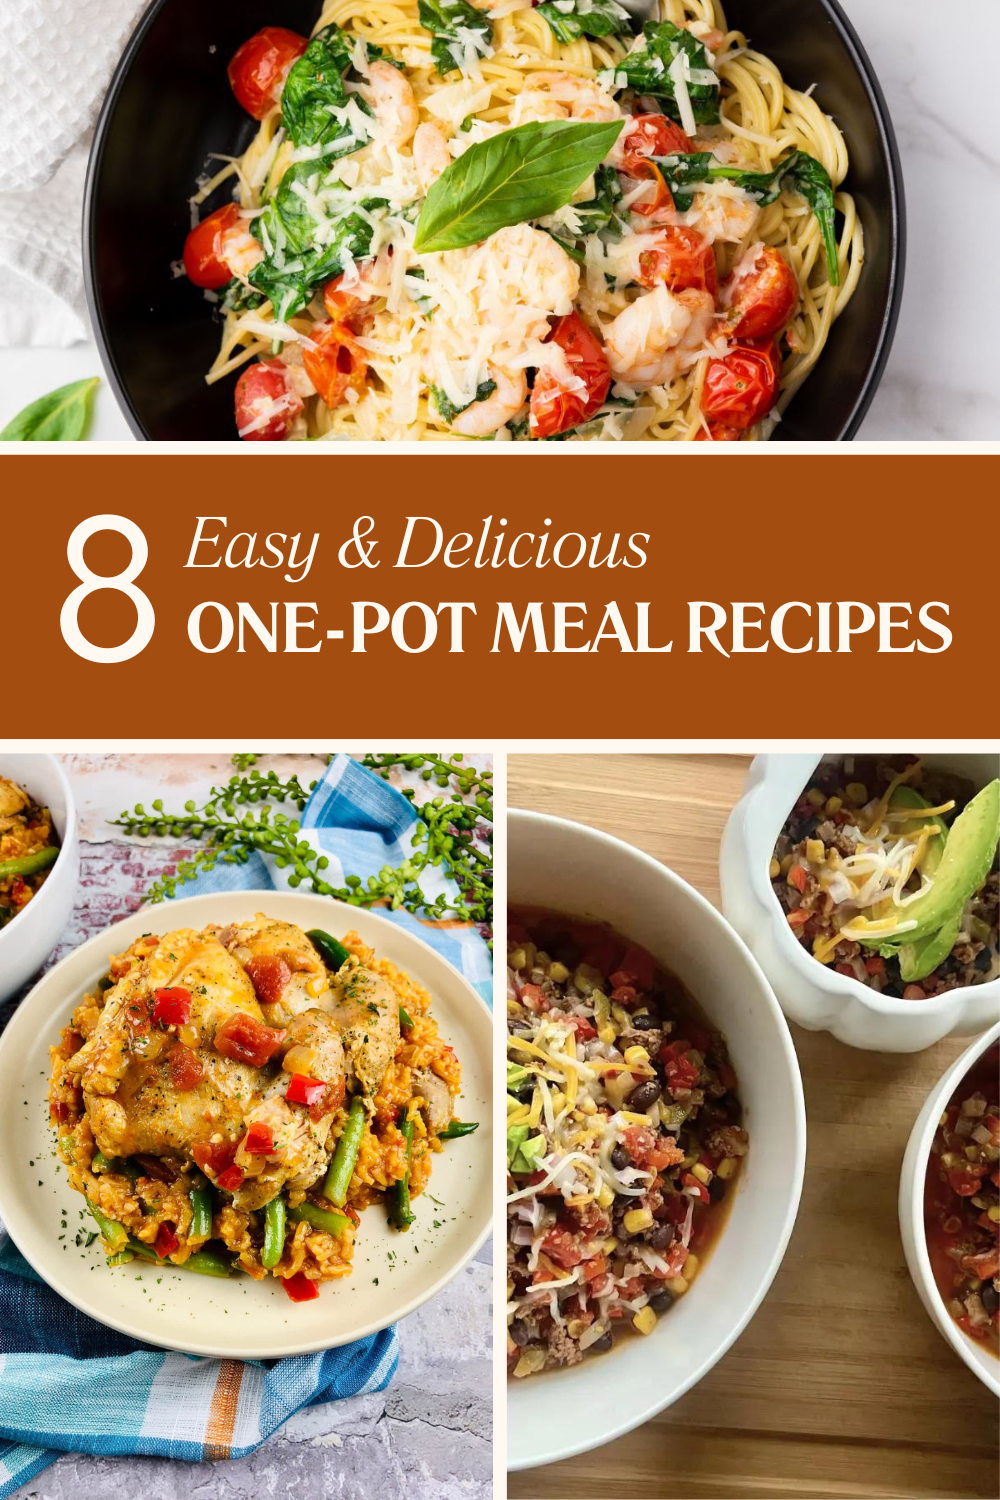 Save Time and Money with These One-Pot Meals